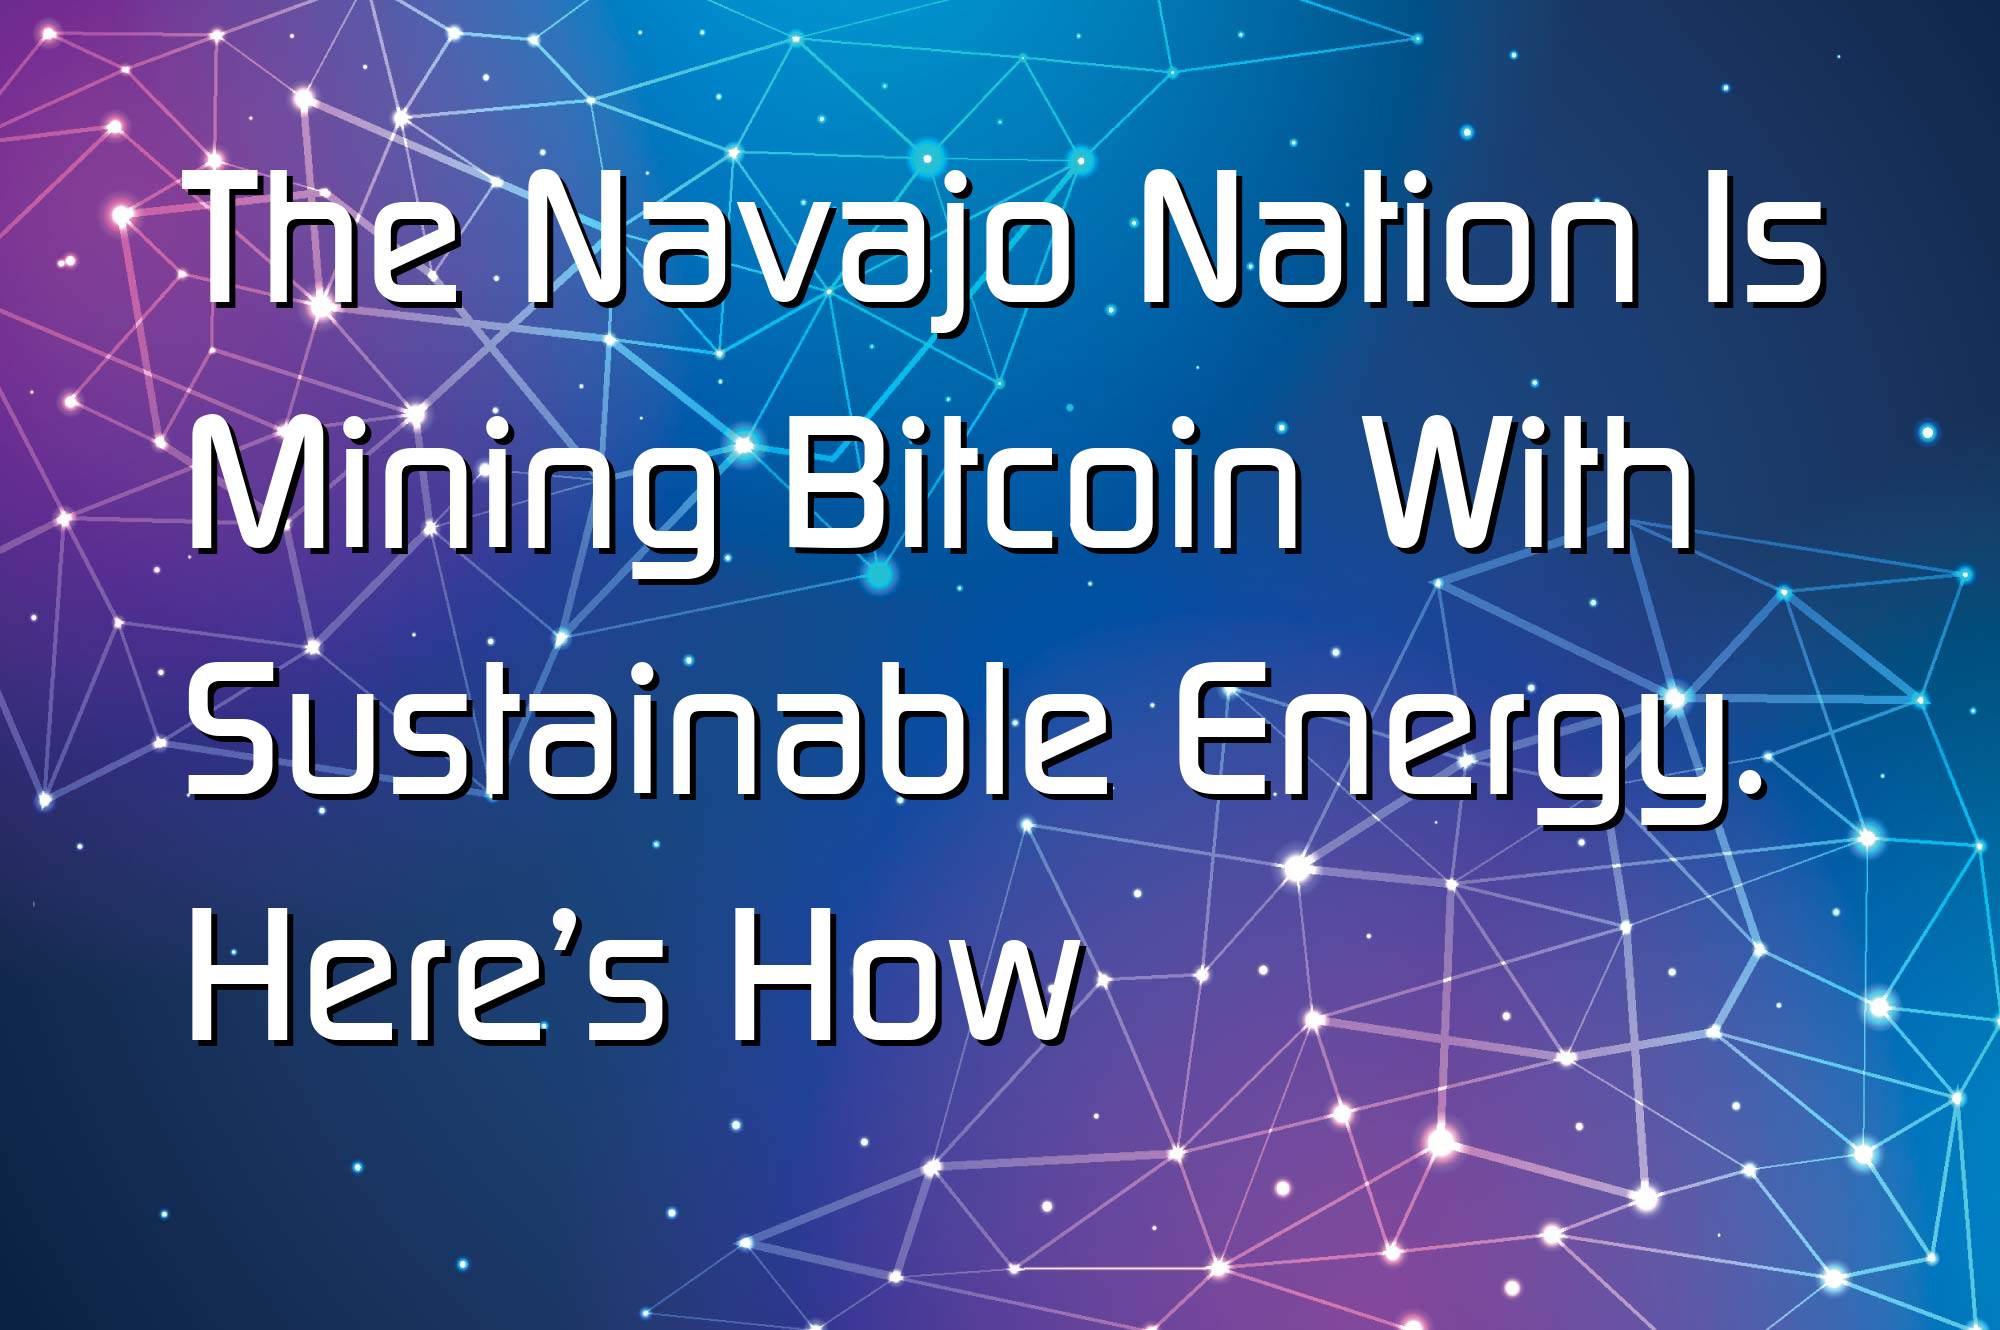 @$60255: The Navajo Nation Is Mining Bitcoin With Sustainable Energy. Here’s How